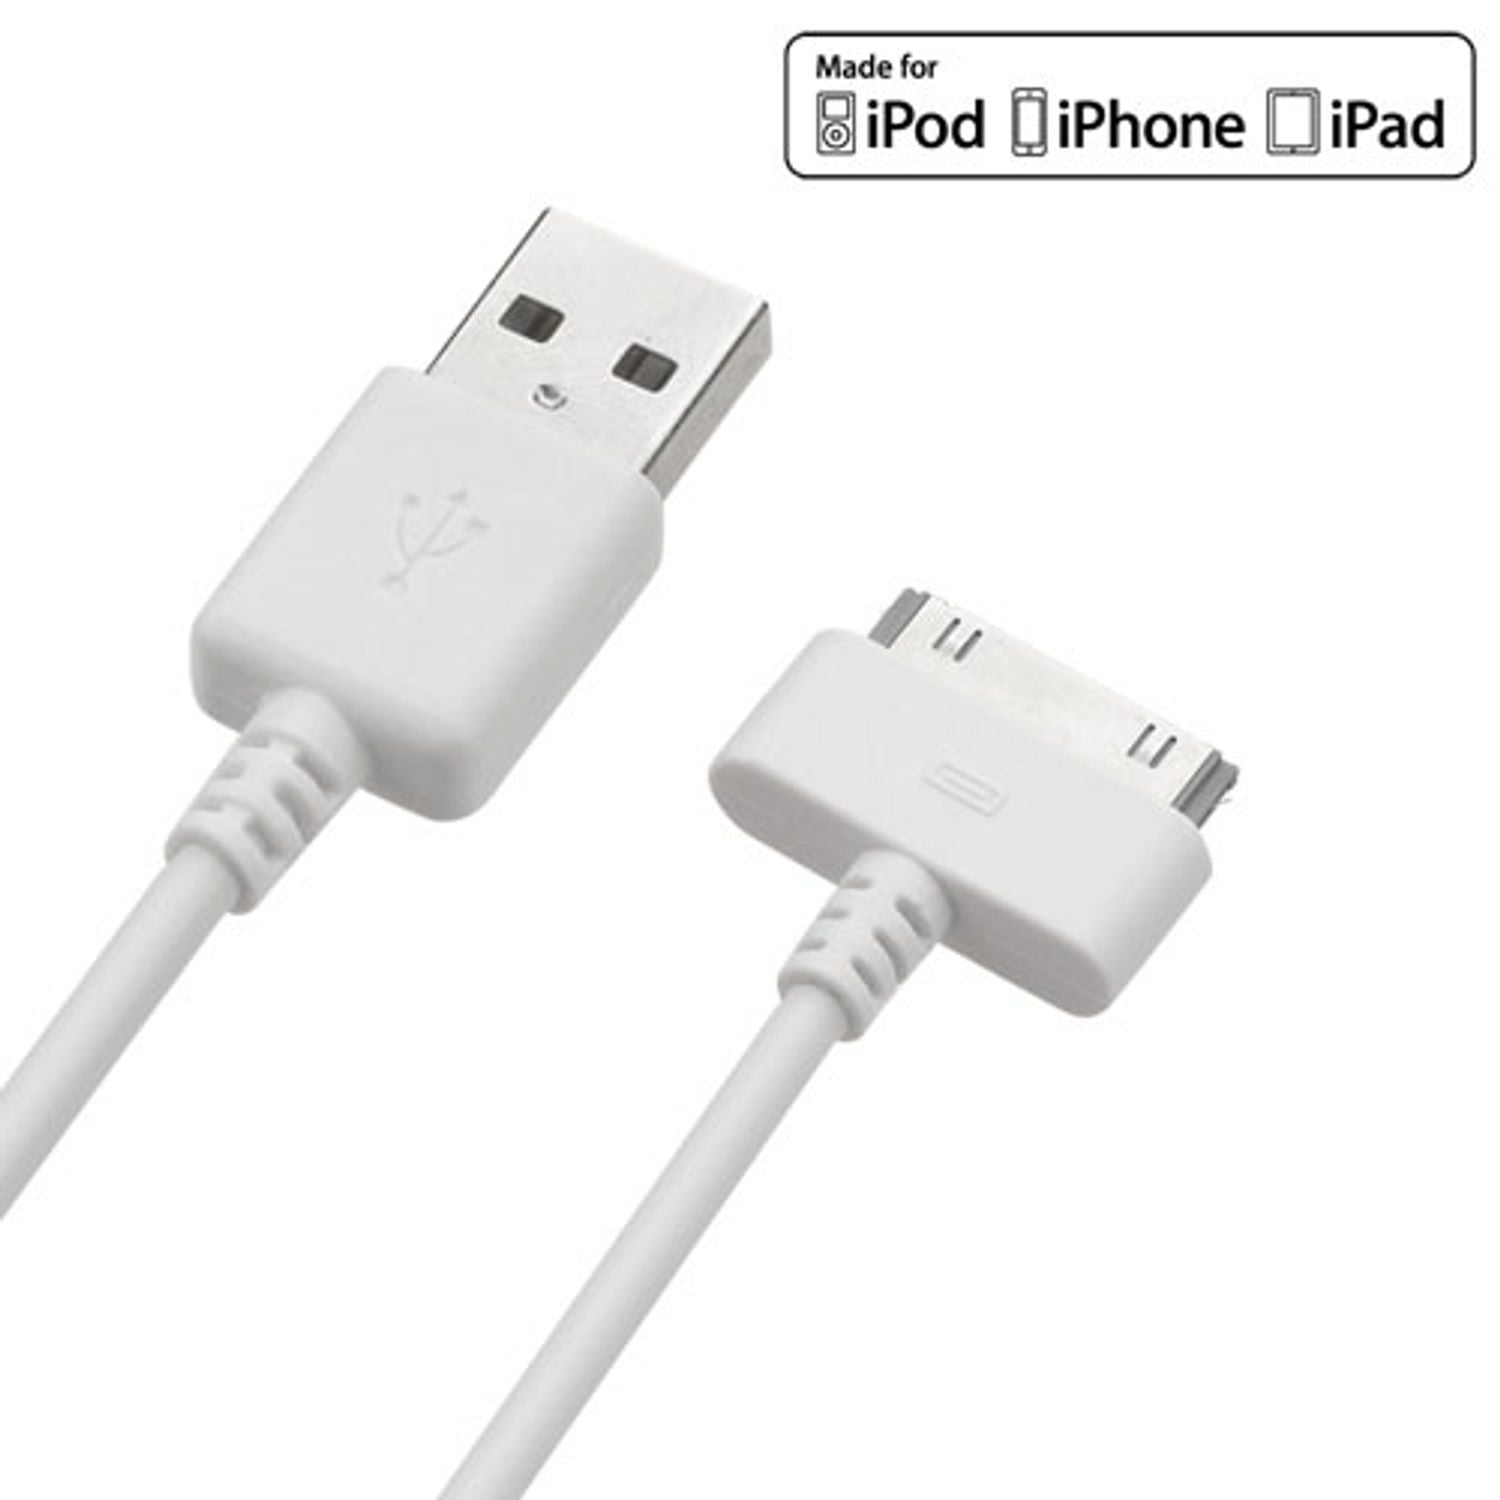 2PCS 6FT USB SYNC DATA POWER CHARGER CABLES IPAD IPHONE IPOD CLASSIC NANO GREEN 